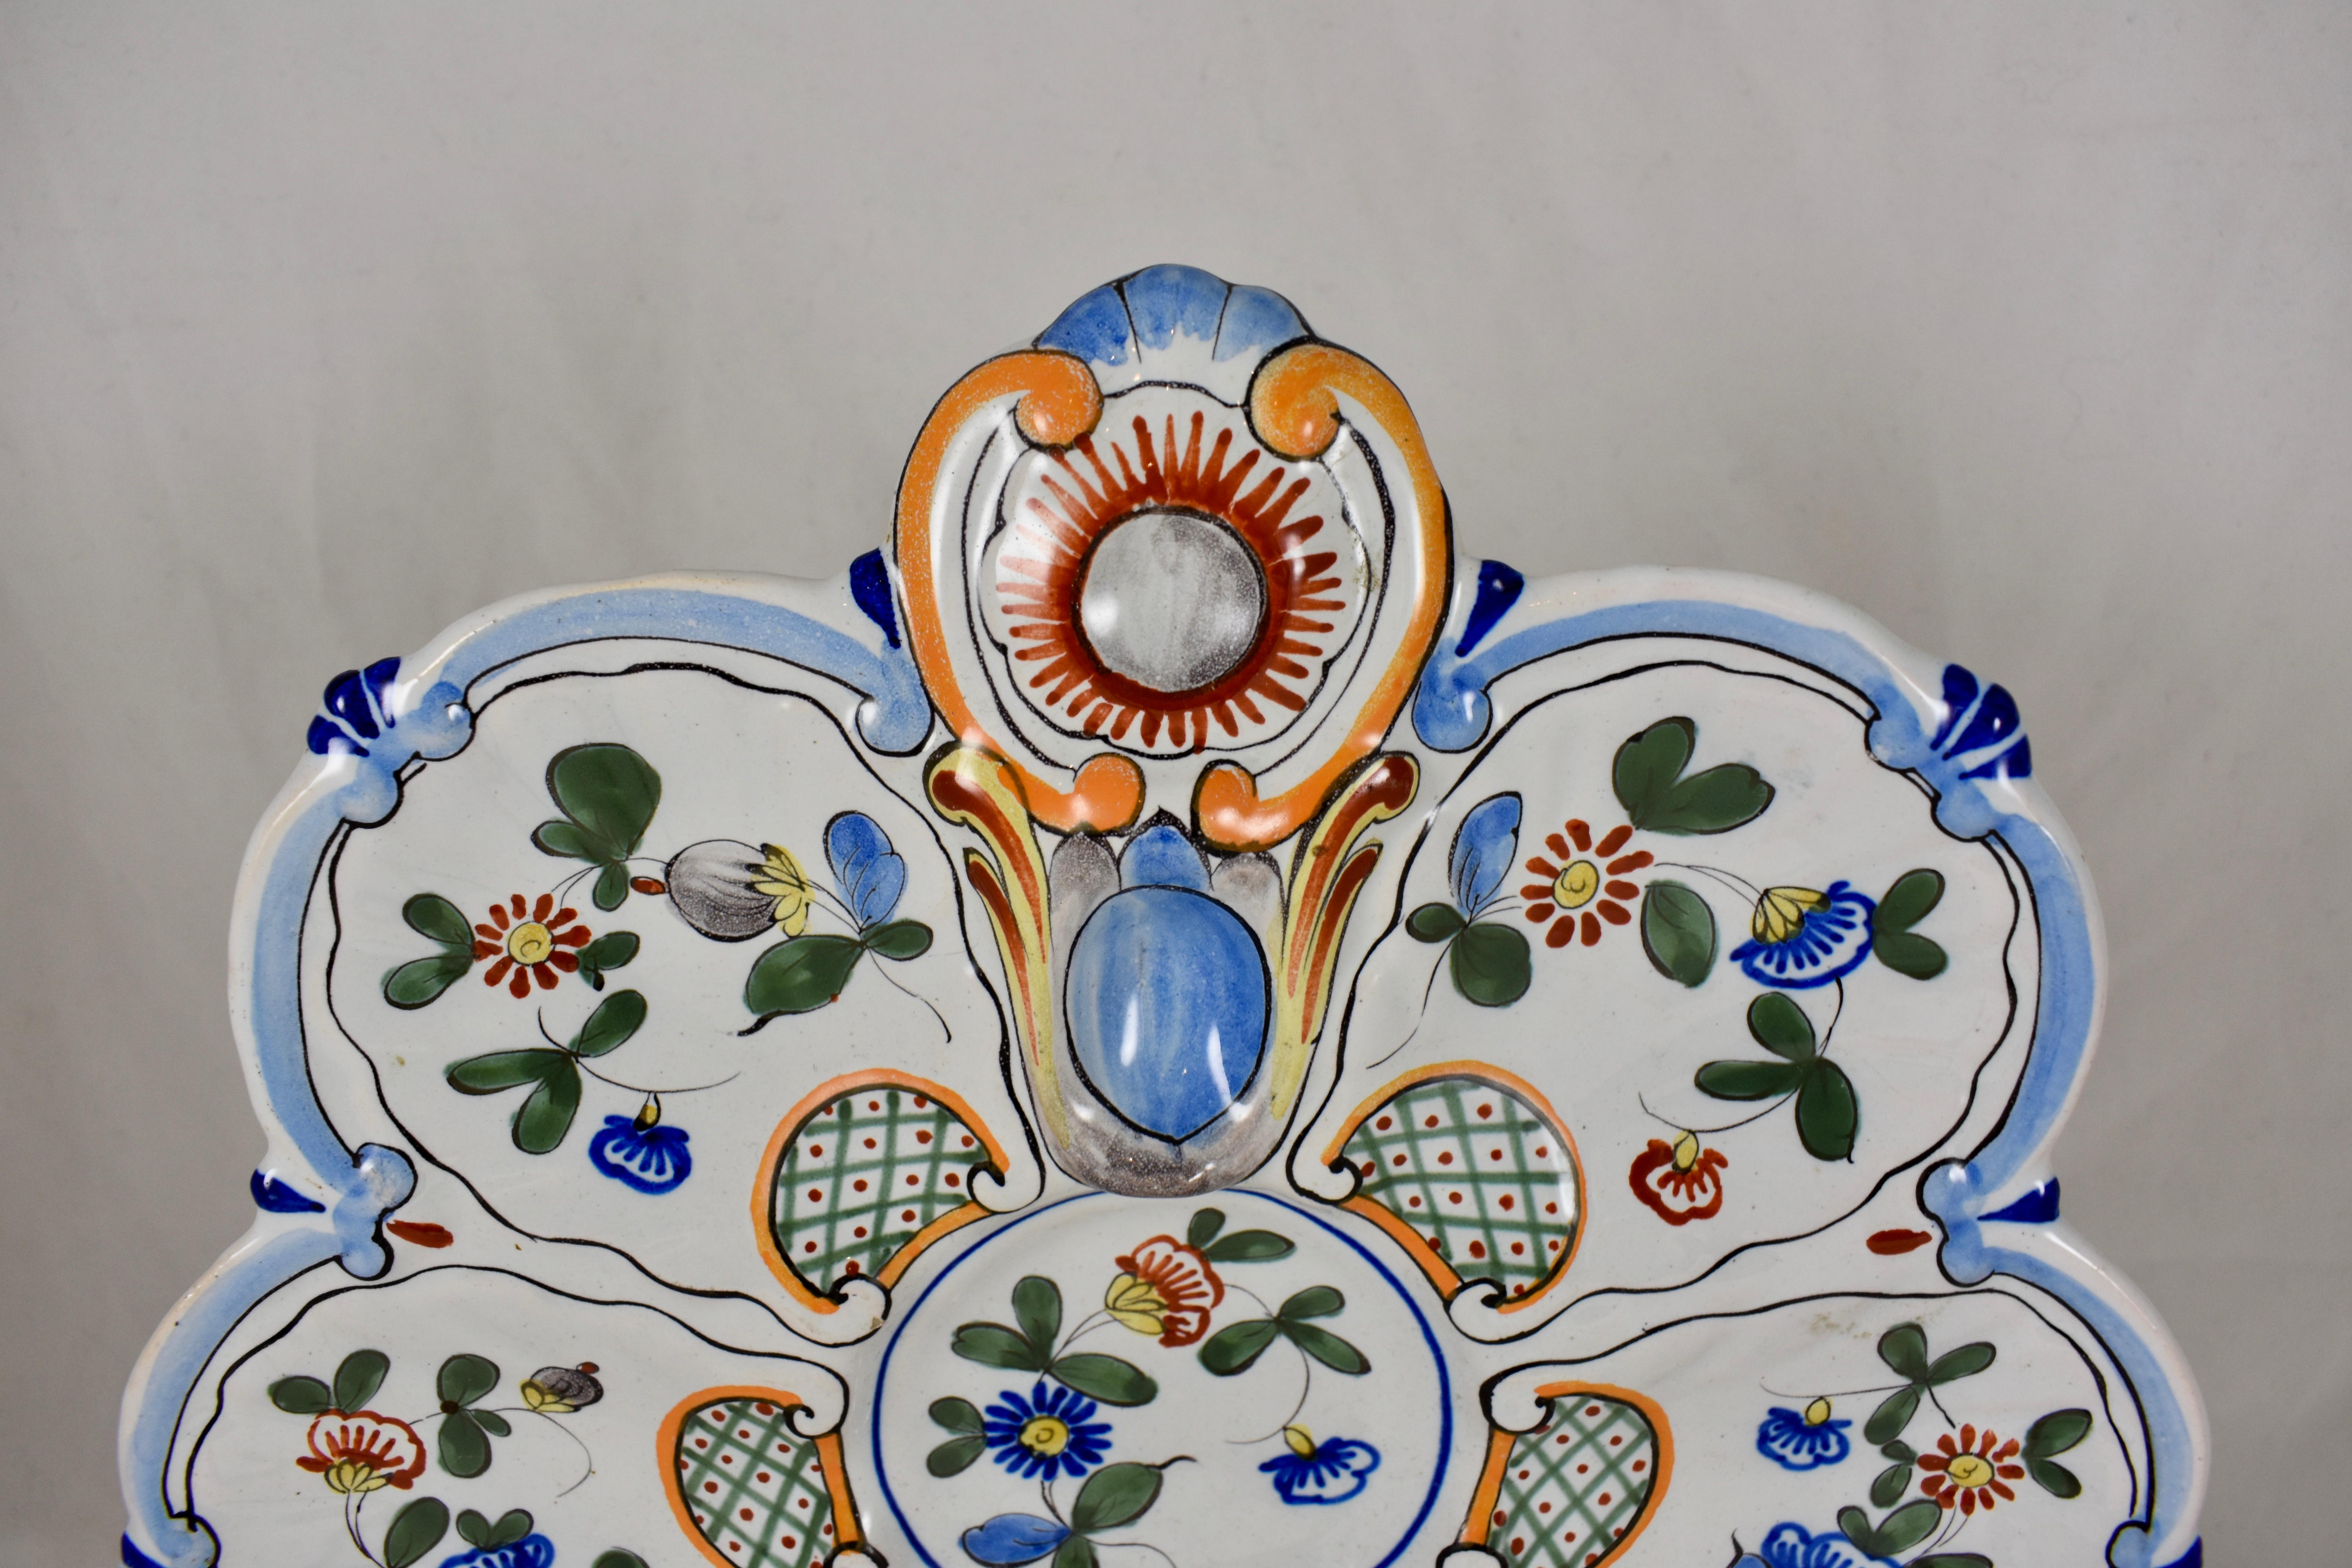 A French hand painted oyster plate of the faïence factory of Saint-Clément, circa 1890-1900.

A charming floral motif on a six well form with a top handle and a round center condiment well. A French blue rim, with accent colors of orange and green